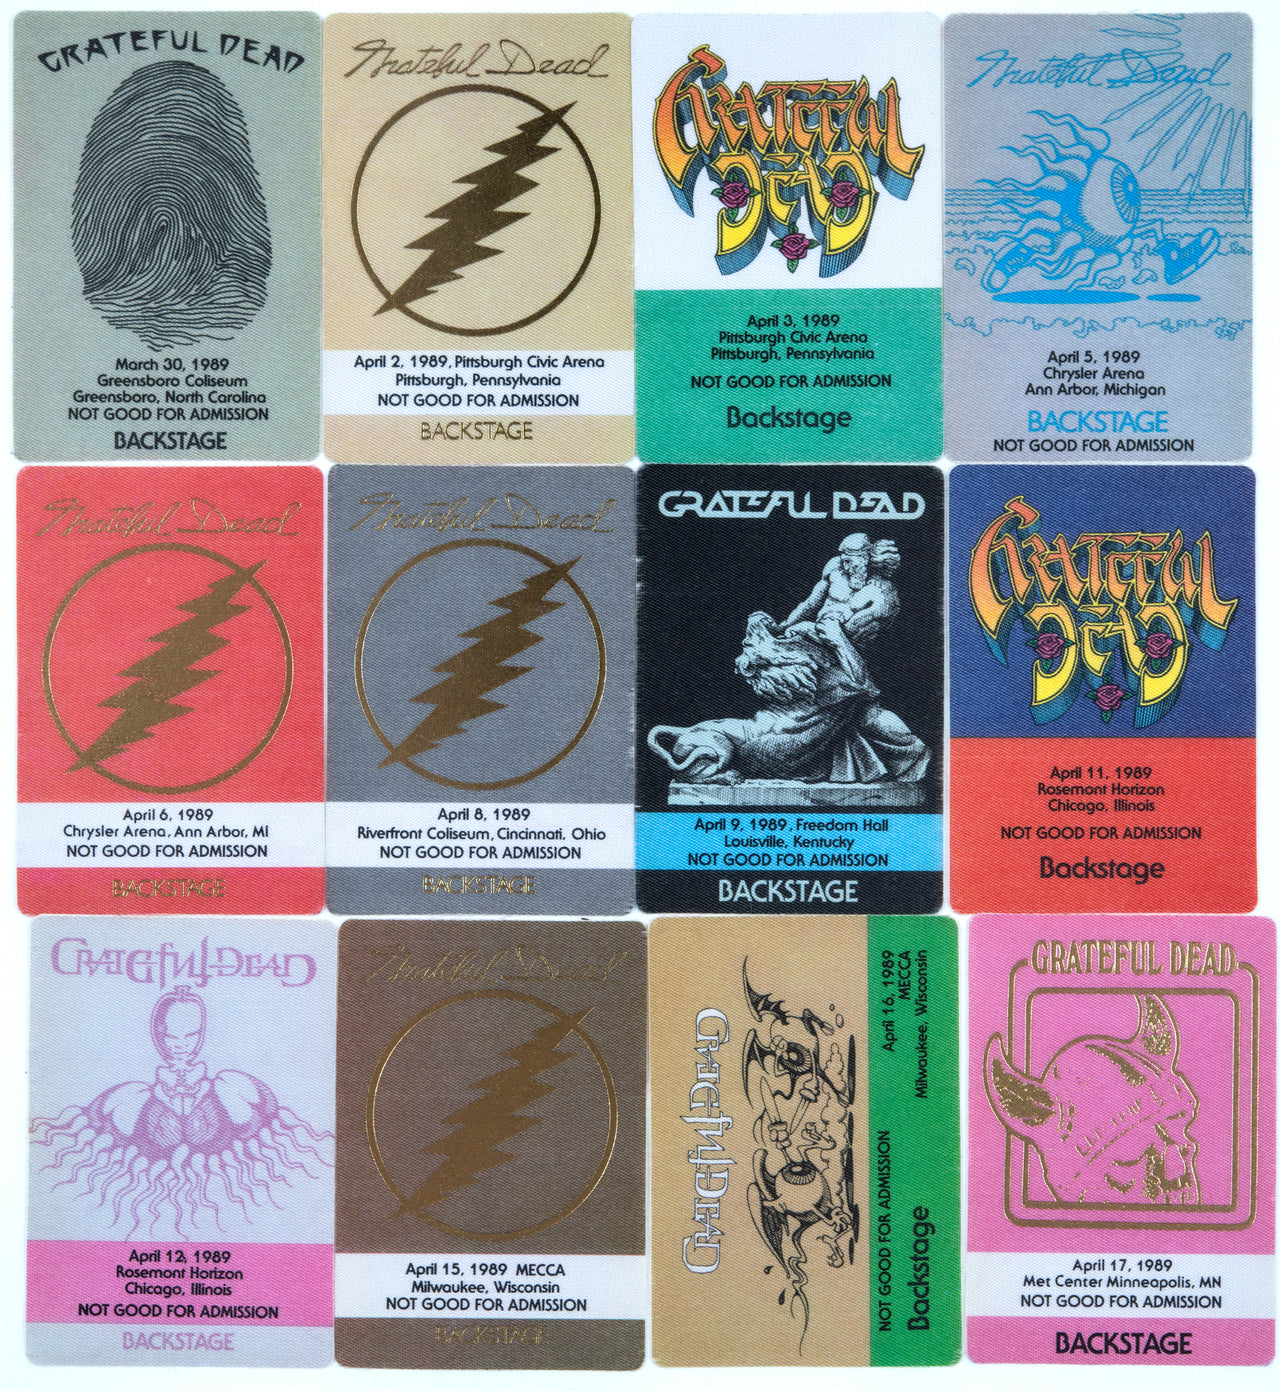 Grateful Dead Backstage Passes (3/30/1989 - 4/17/1989) from Dan Healy